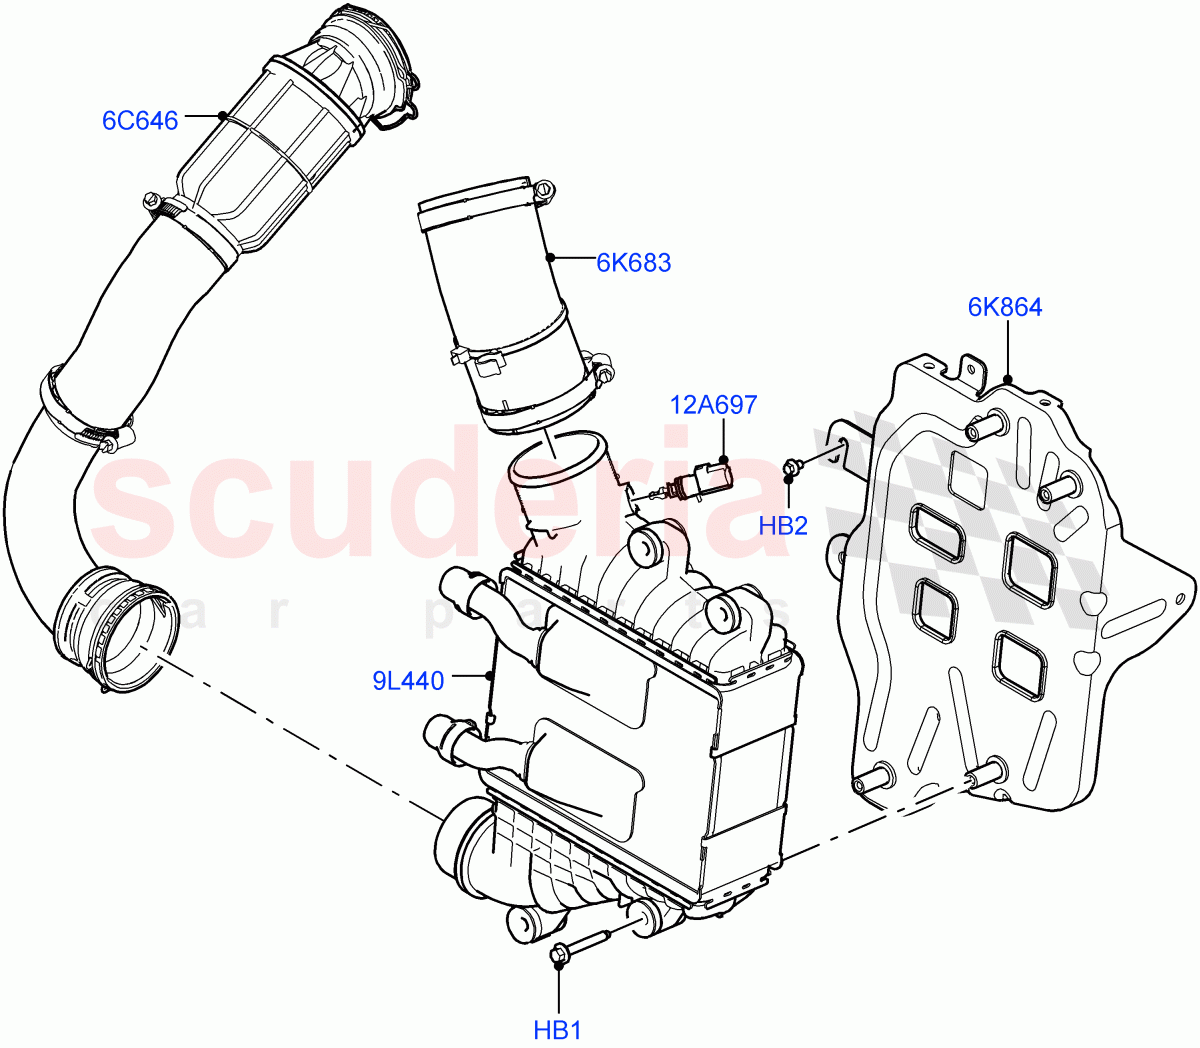 Intercooler/Air Ducts And Hoses(2.0L AJ20D4 Diesel High PTA,Halewood (UK)) of Land Rover Land Rover Range Rover Evoque (2019+) [2.0 Turbo Diesel]